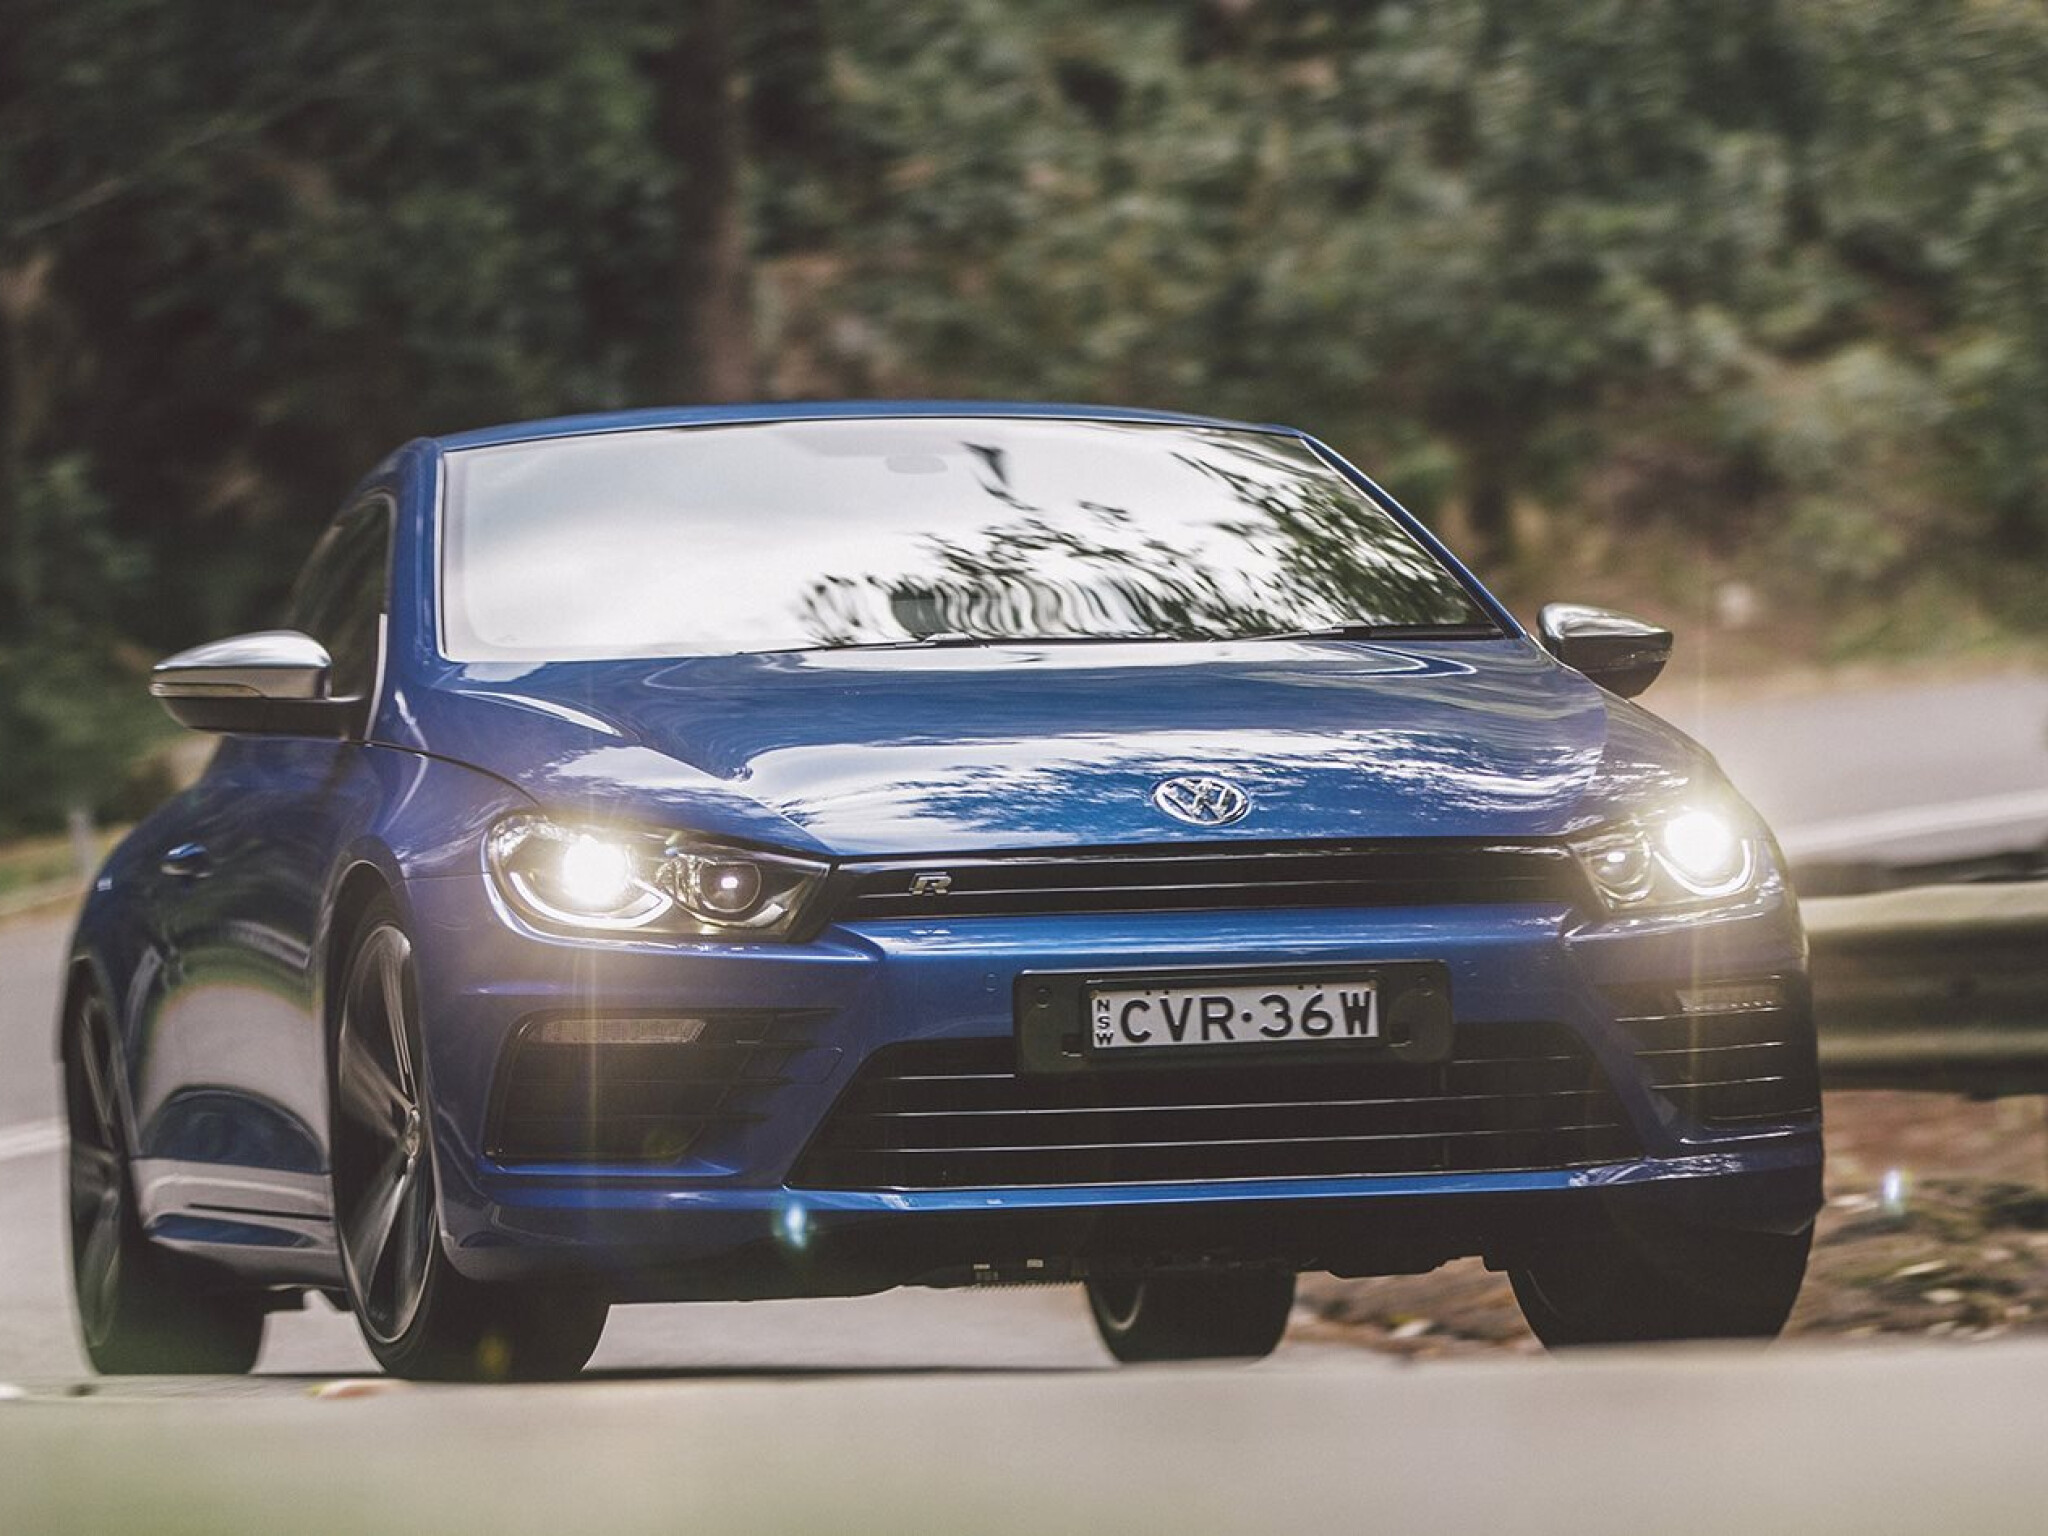 2015 Volkswagen Scirocco Photos and Info – News – Car and Driver